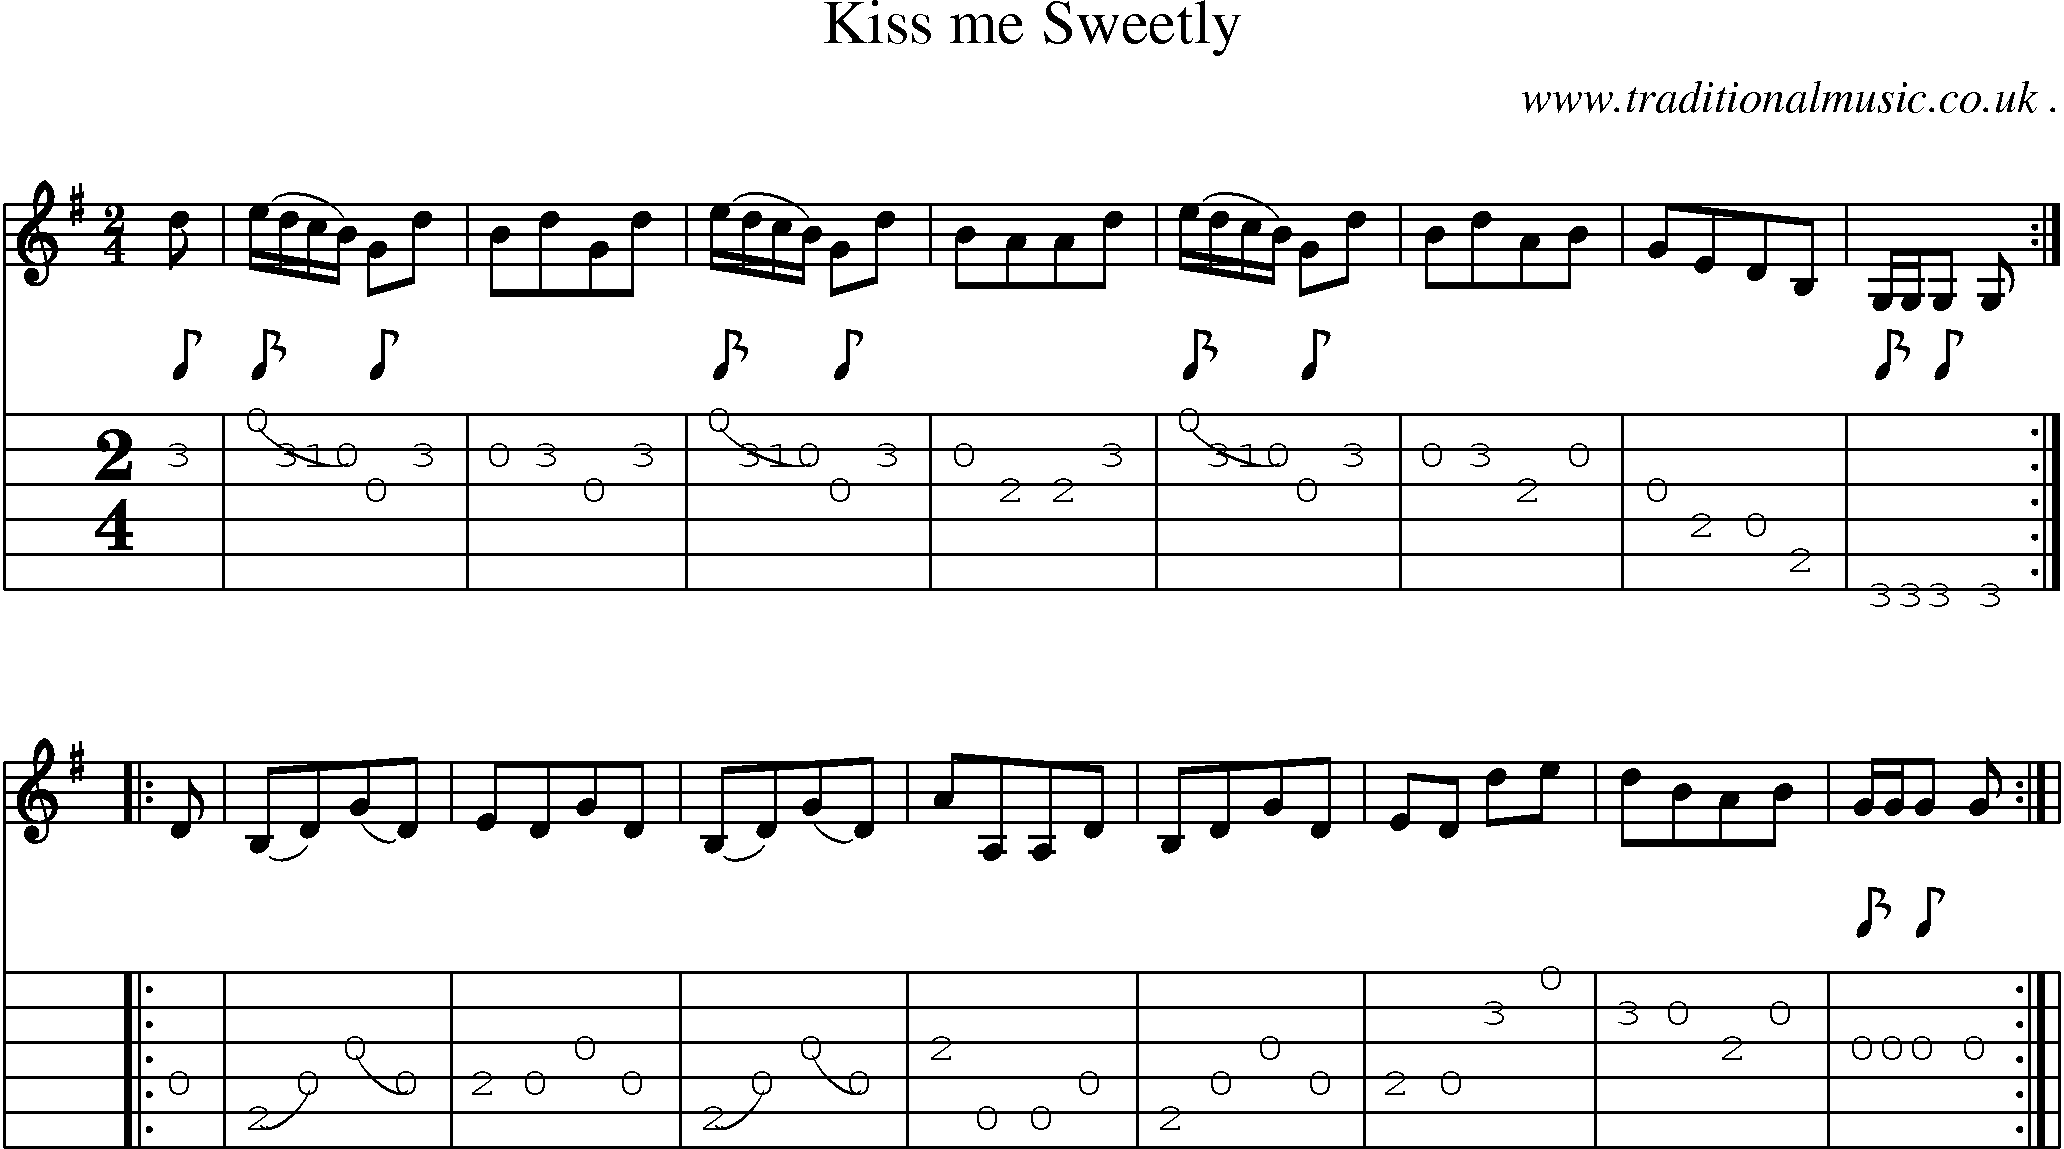 Sheet-Music and Guitar Tabs for Kiss Me Sweetly